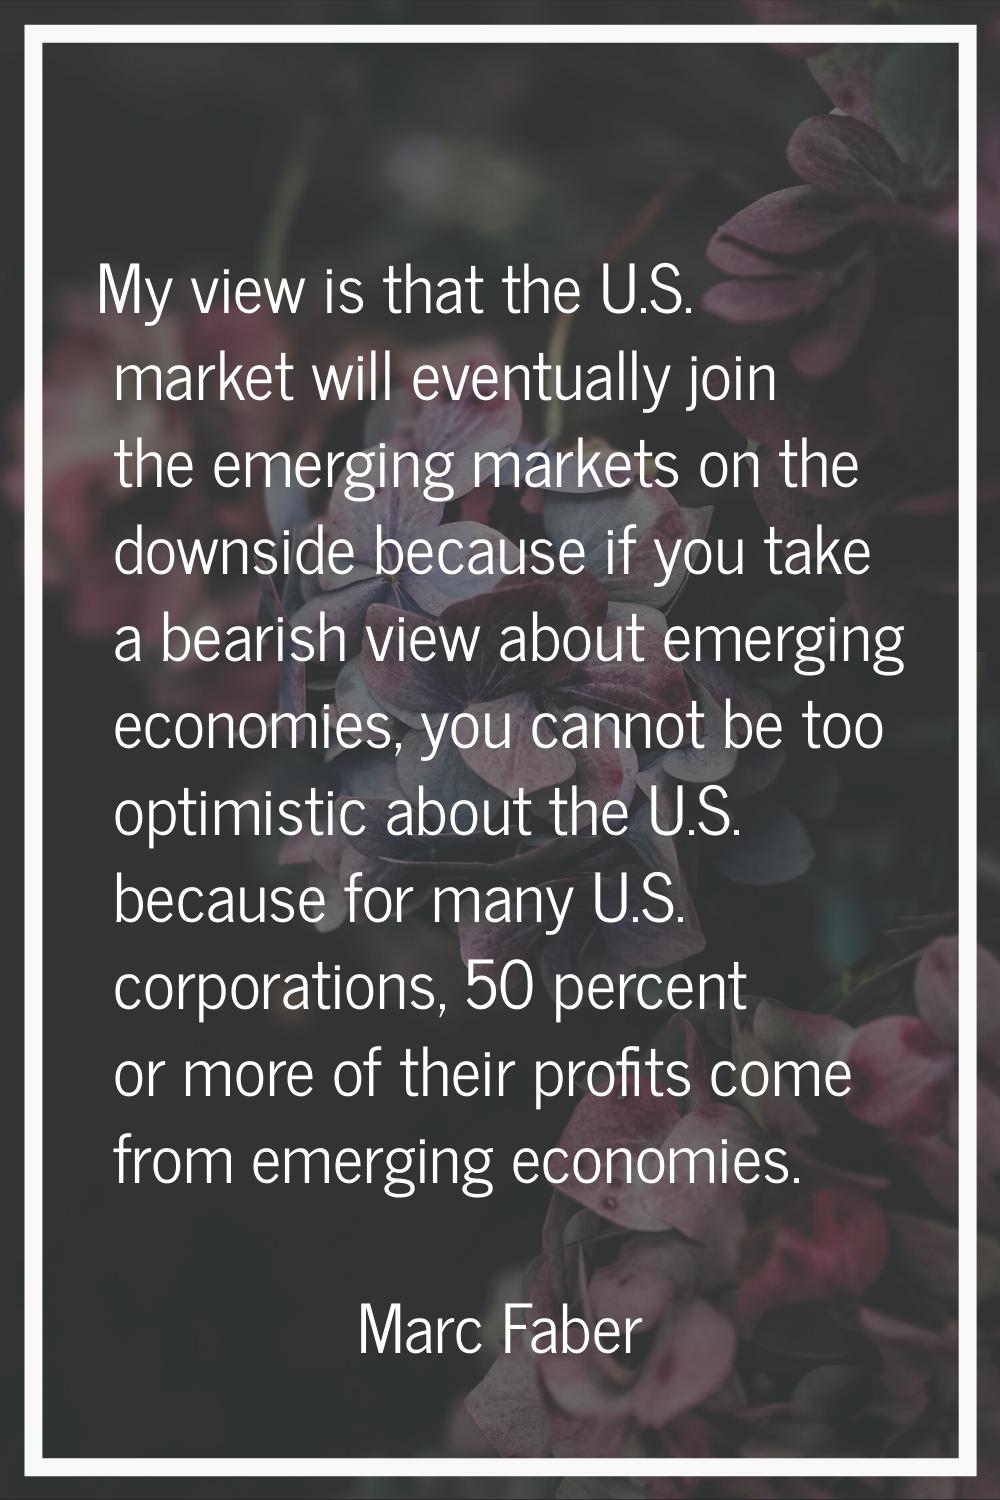 My view is that the U.S. market will eventually join the emerging markets on the downside because i